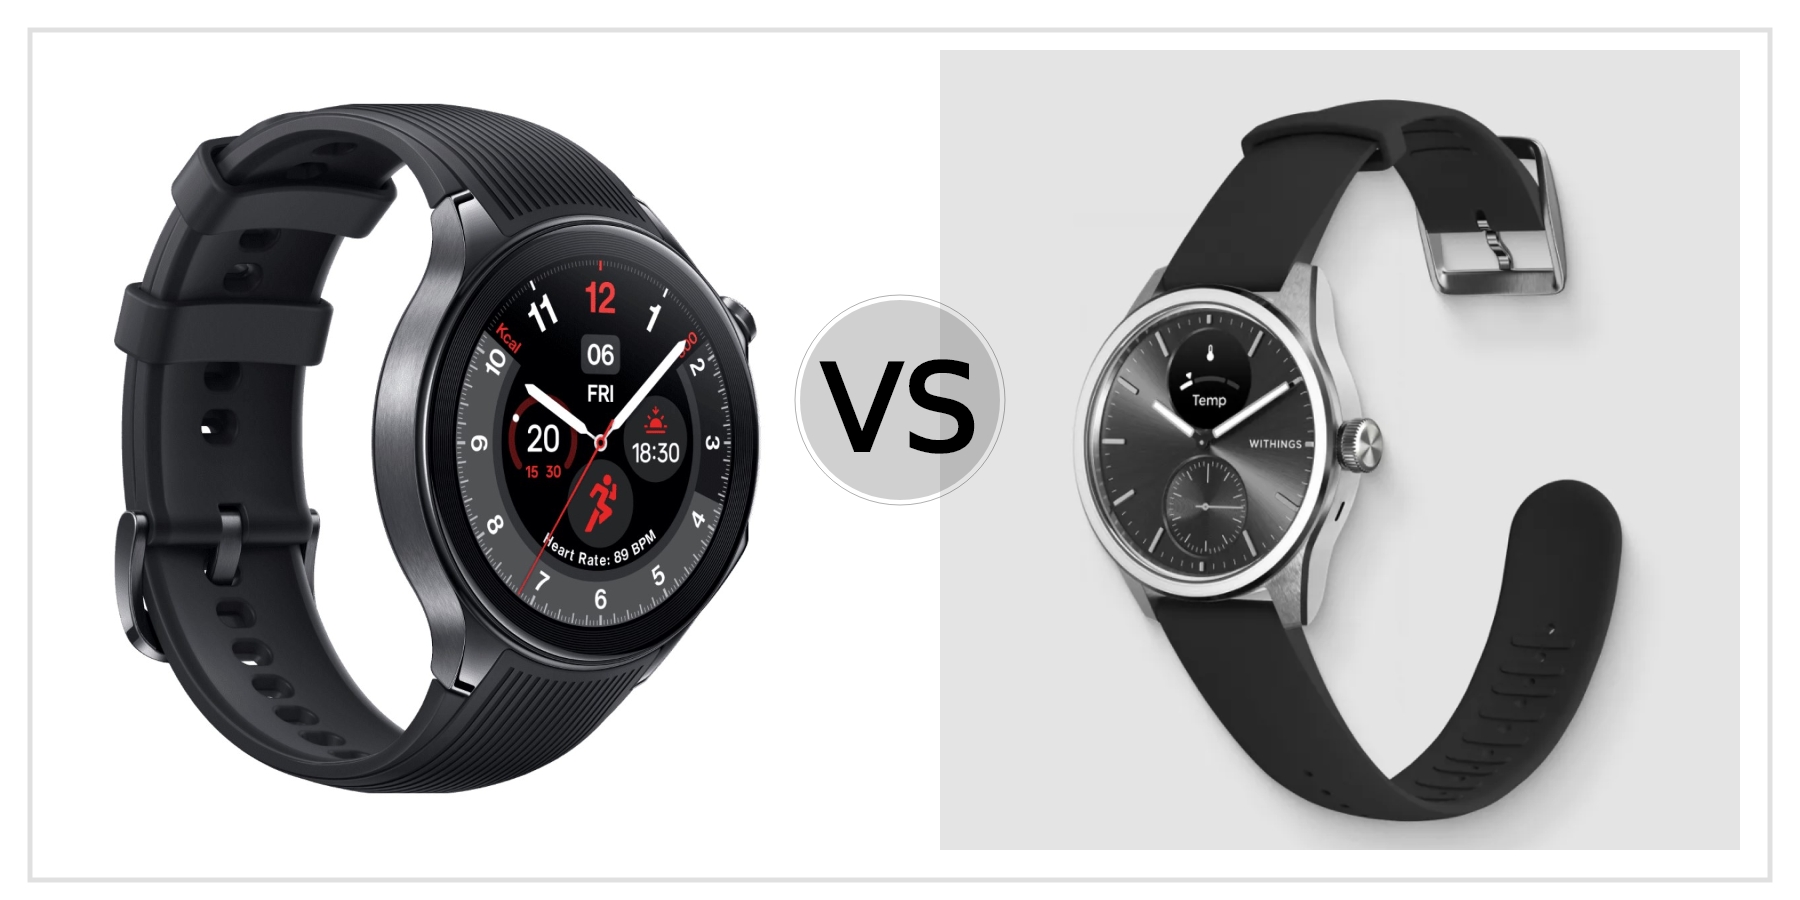 Compare OnePlus Watch 2 VS Withings ScanWatch 2 to see which is better